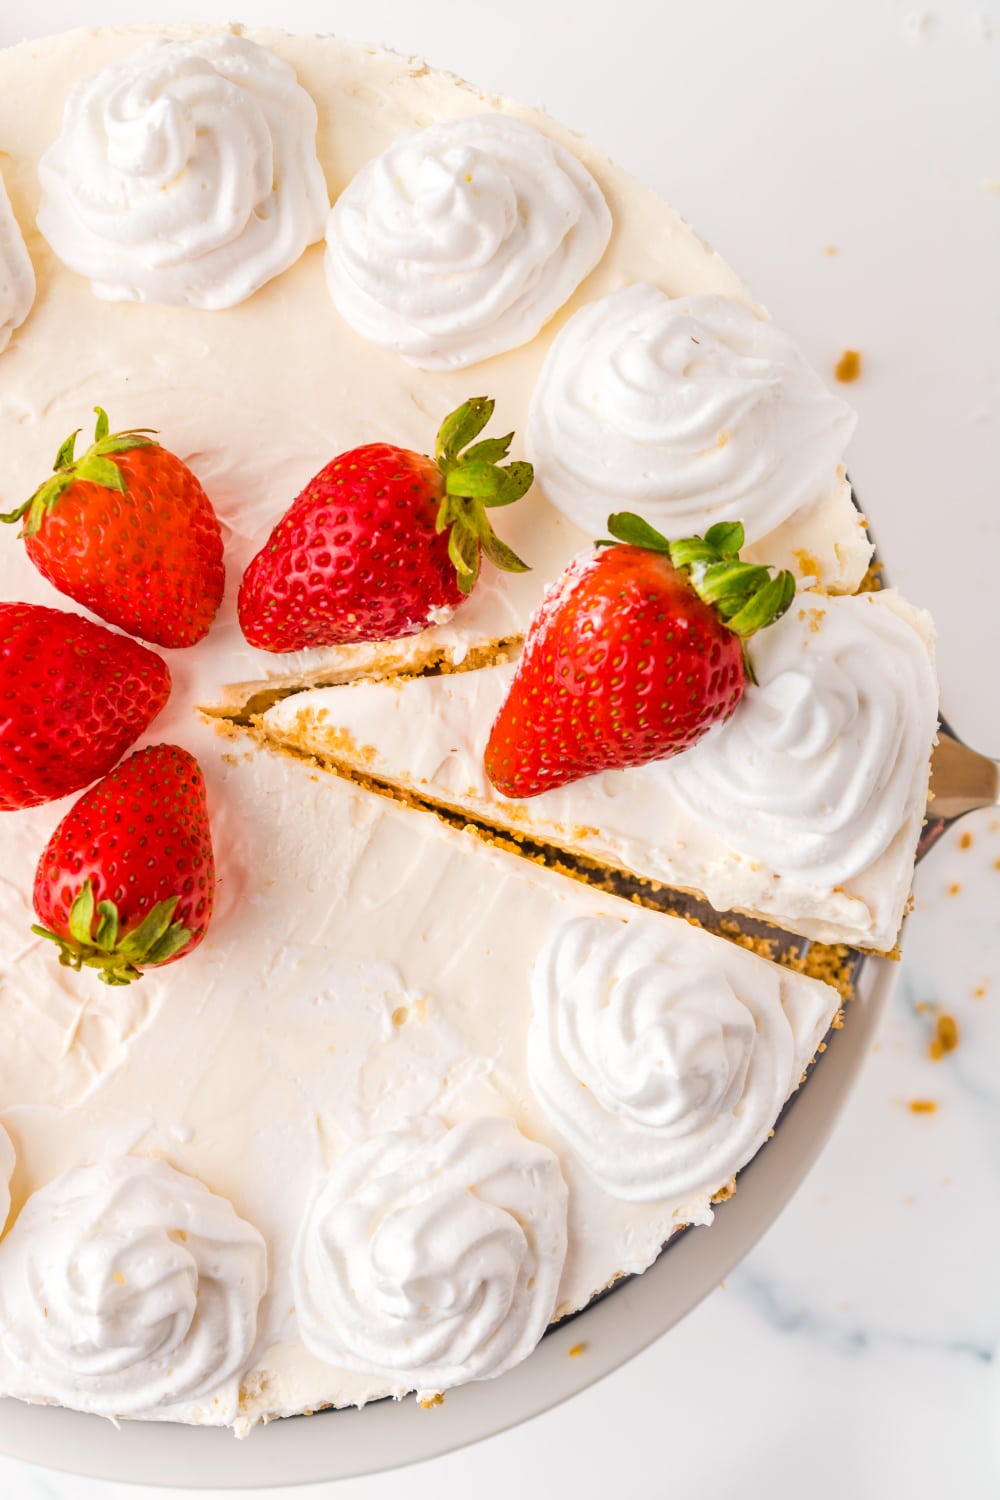 No Bake Cheesecake topped with strawberries and whipped cream.